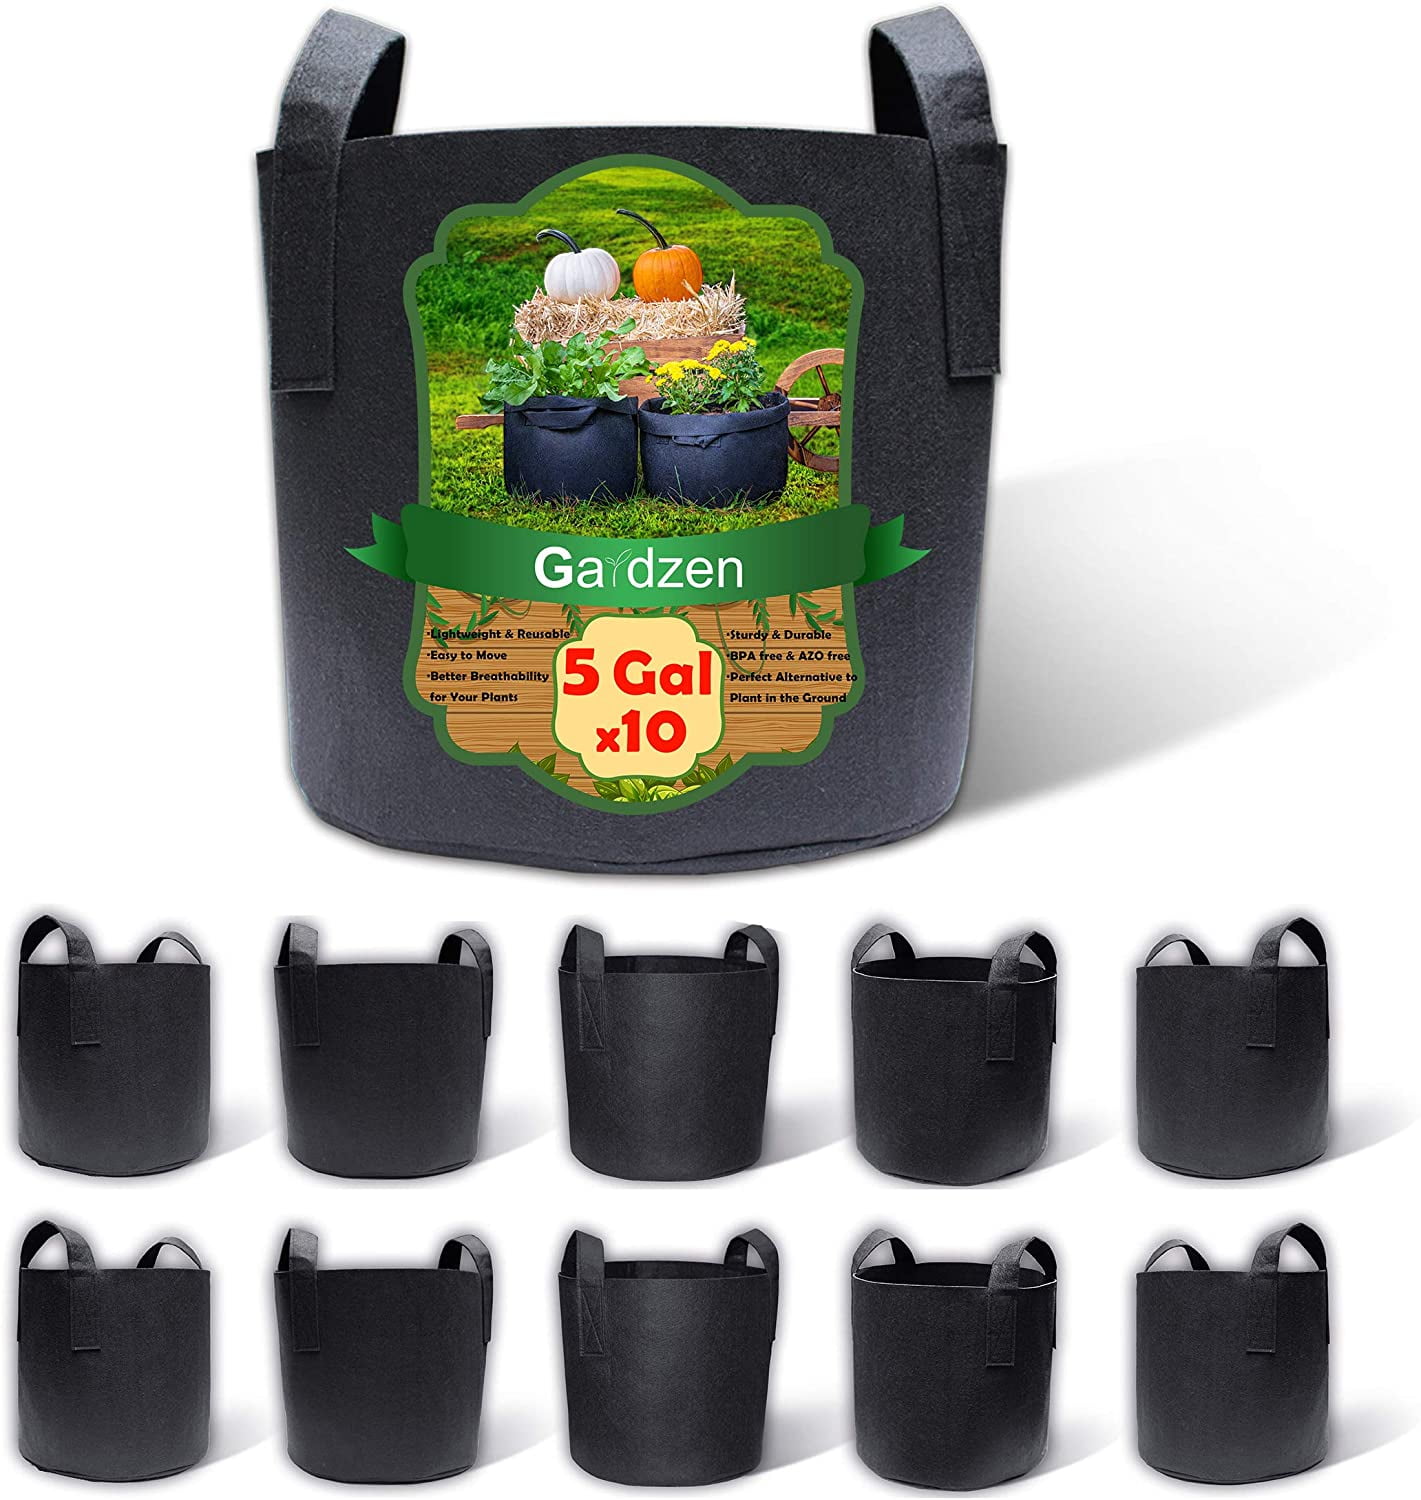 Hongville 5-Pack Black Grow Bags Aeration Fabric Pots w/Handles Root Container 